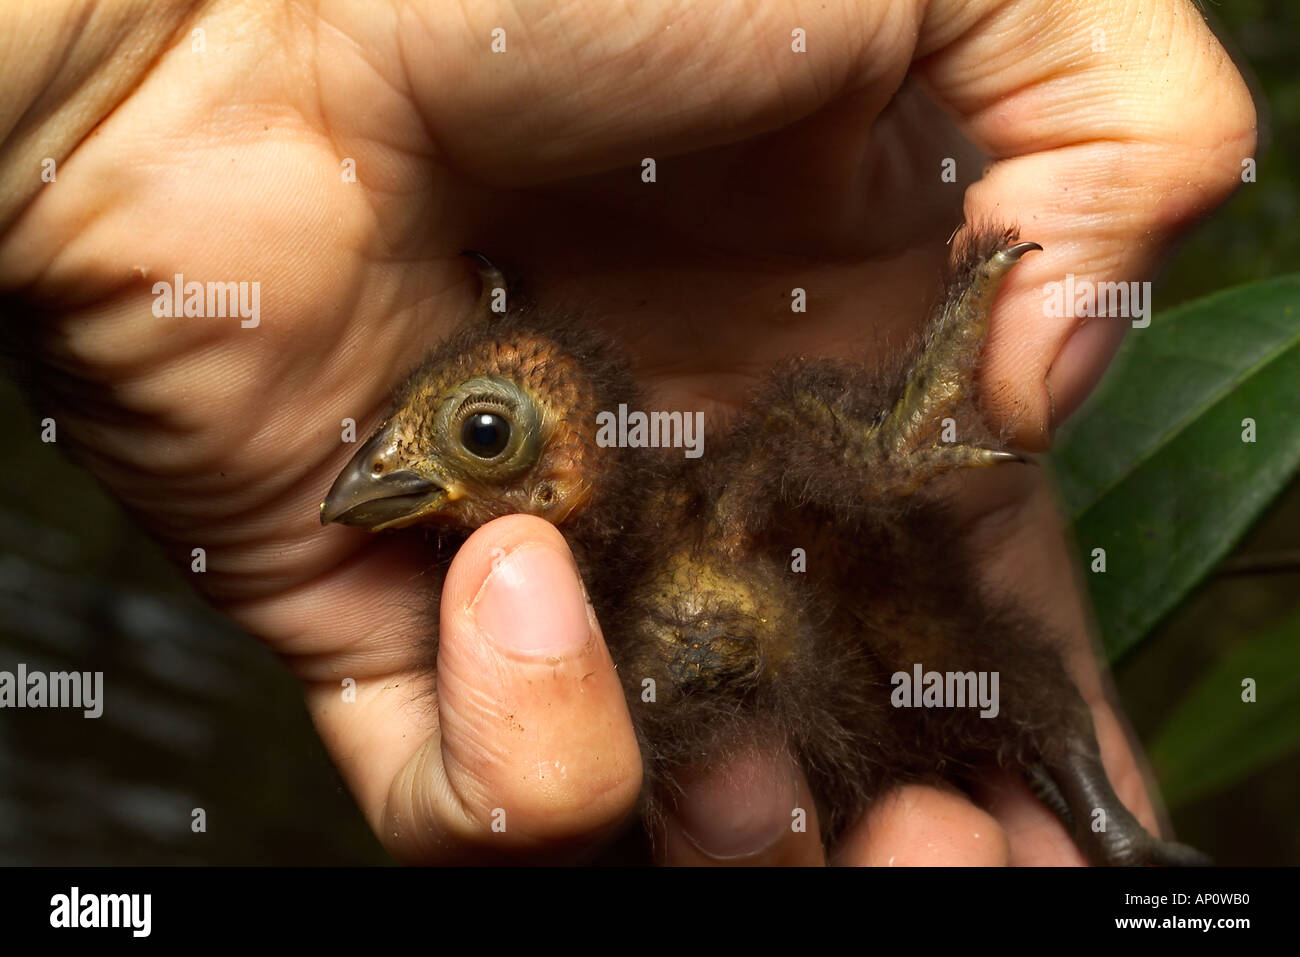 hoatzin-opisthocomus-hoazin-day-old-chick-showing-claws-on-wing-AP0WB0.jpg